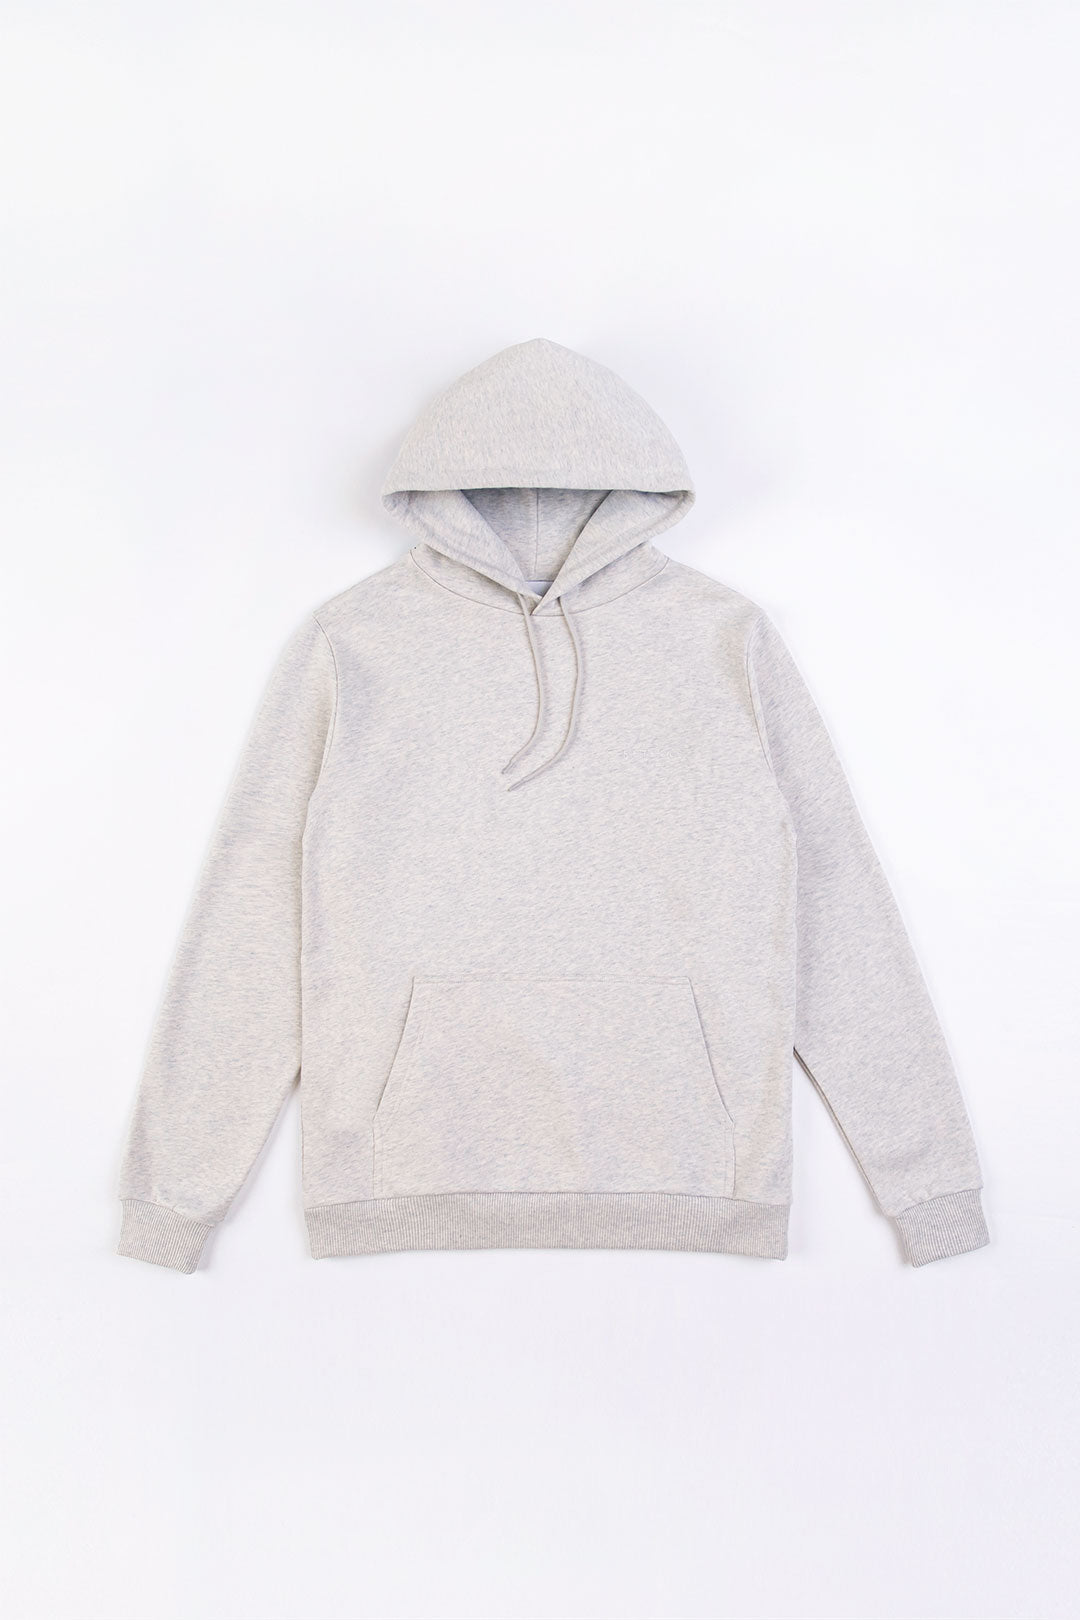 Light gray hoodie logo made of 100% organic cotton from Rotholz